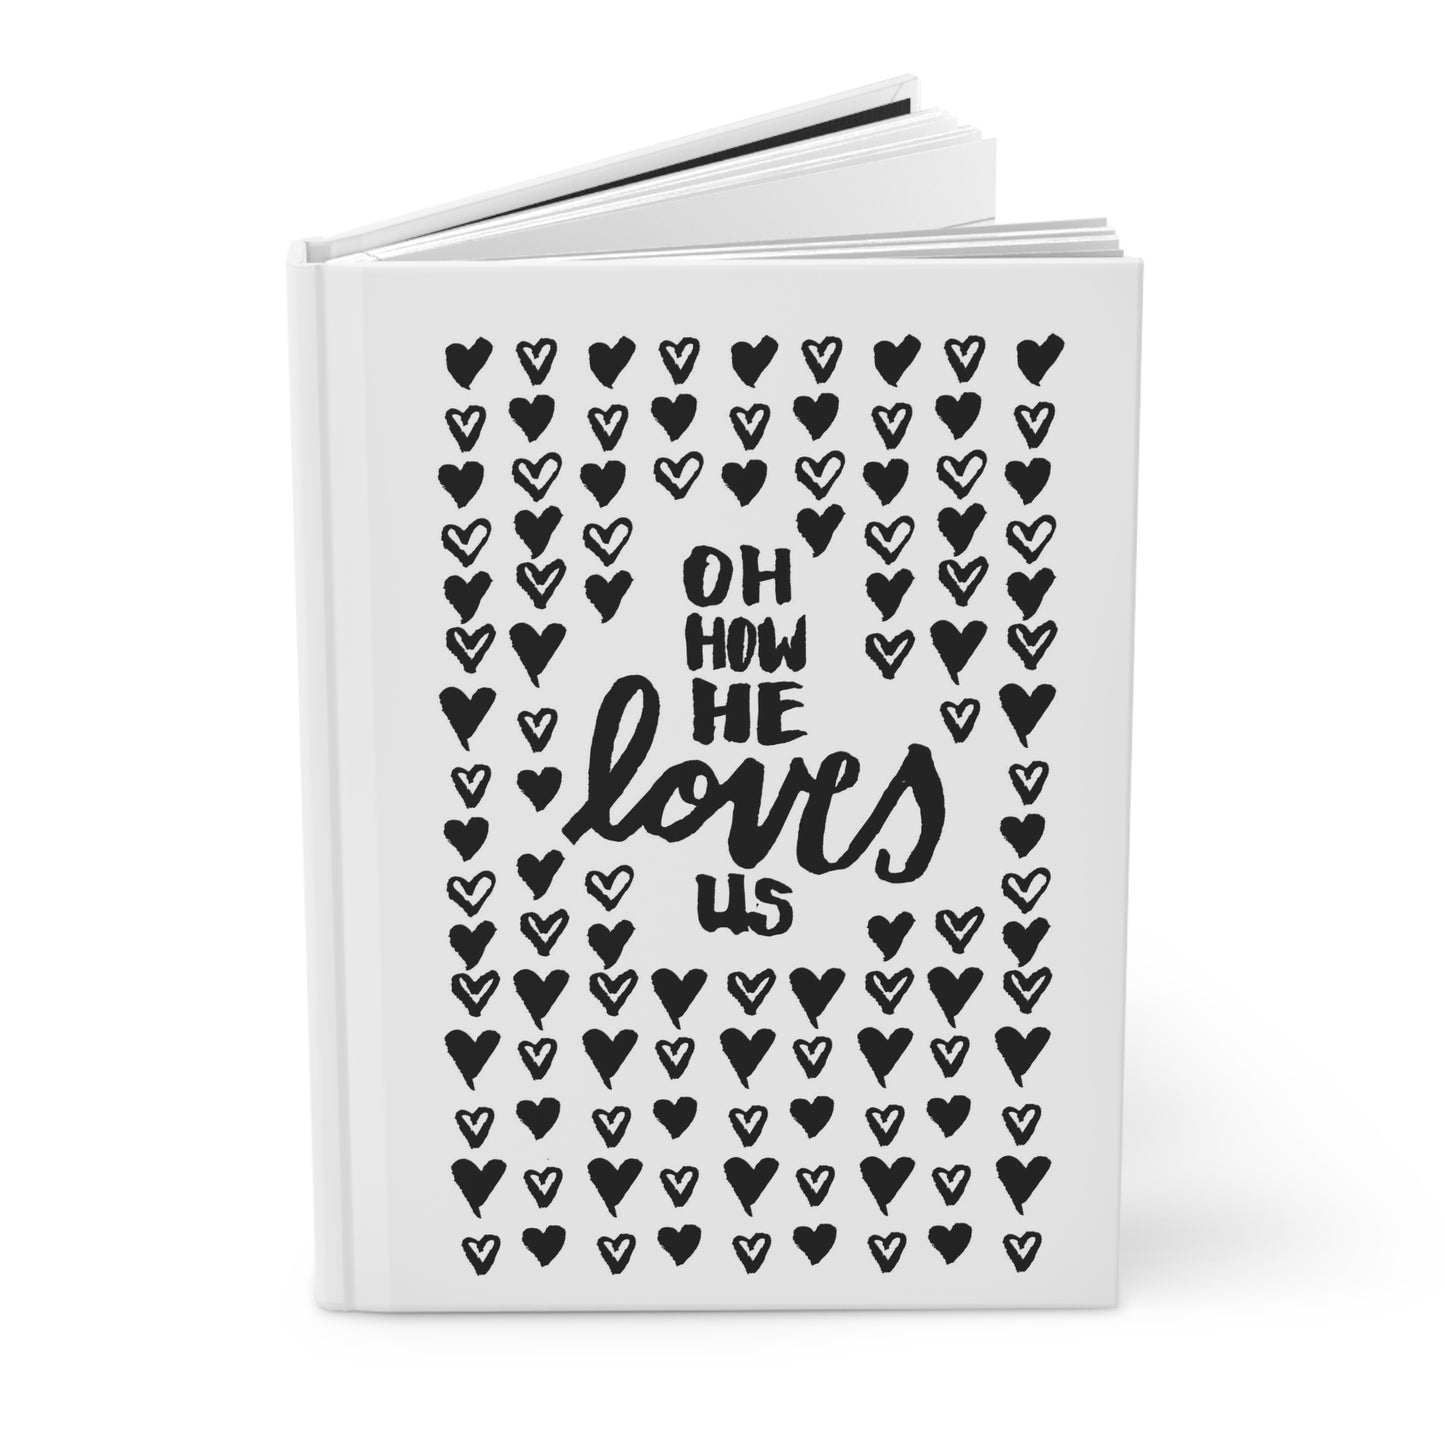 Oh How He Loves Us Journal